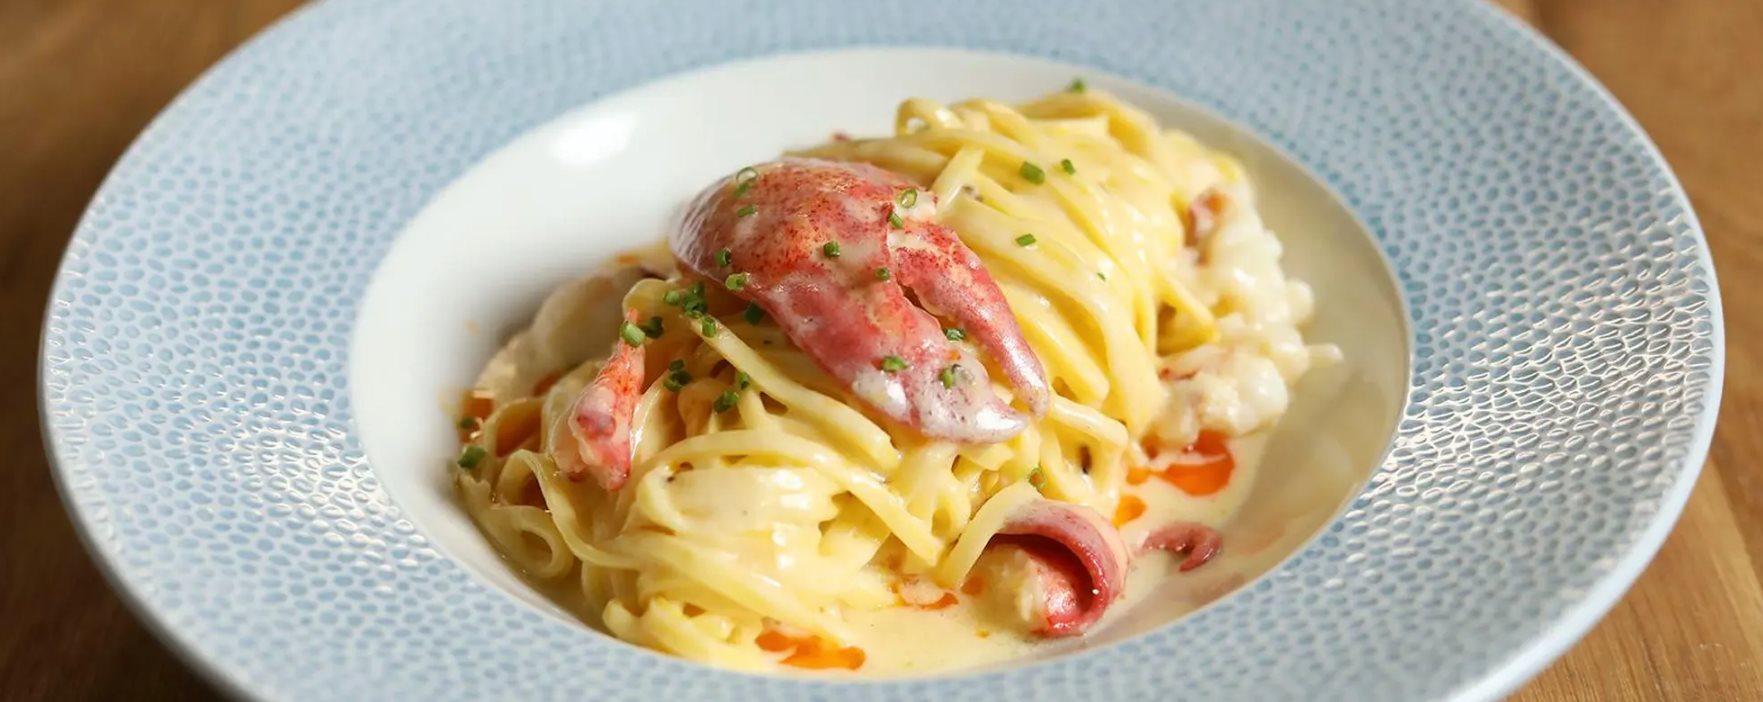 A blue and white dish filled with lobster pasta from Denver's Restaurant Olivia